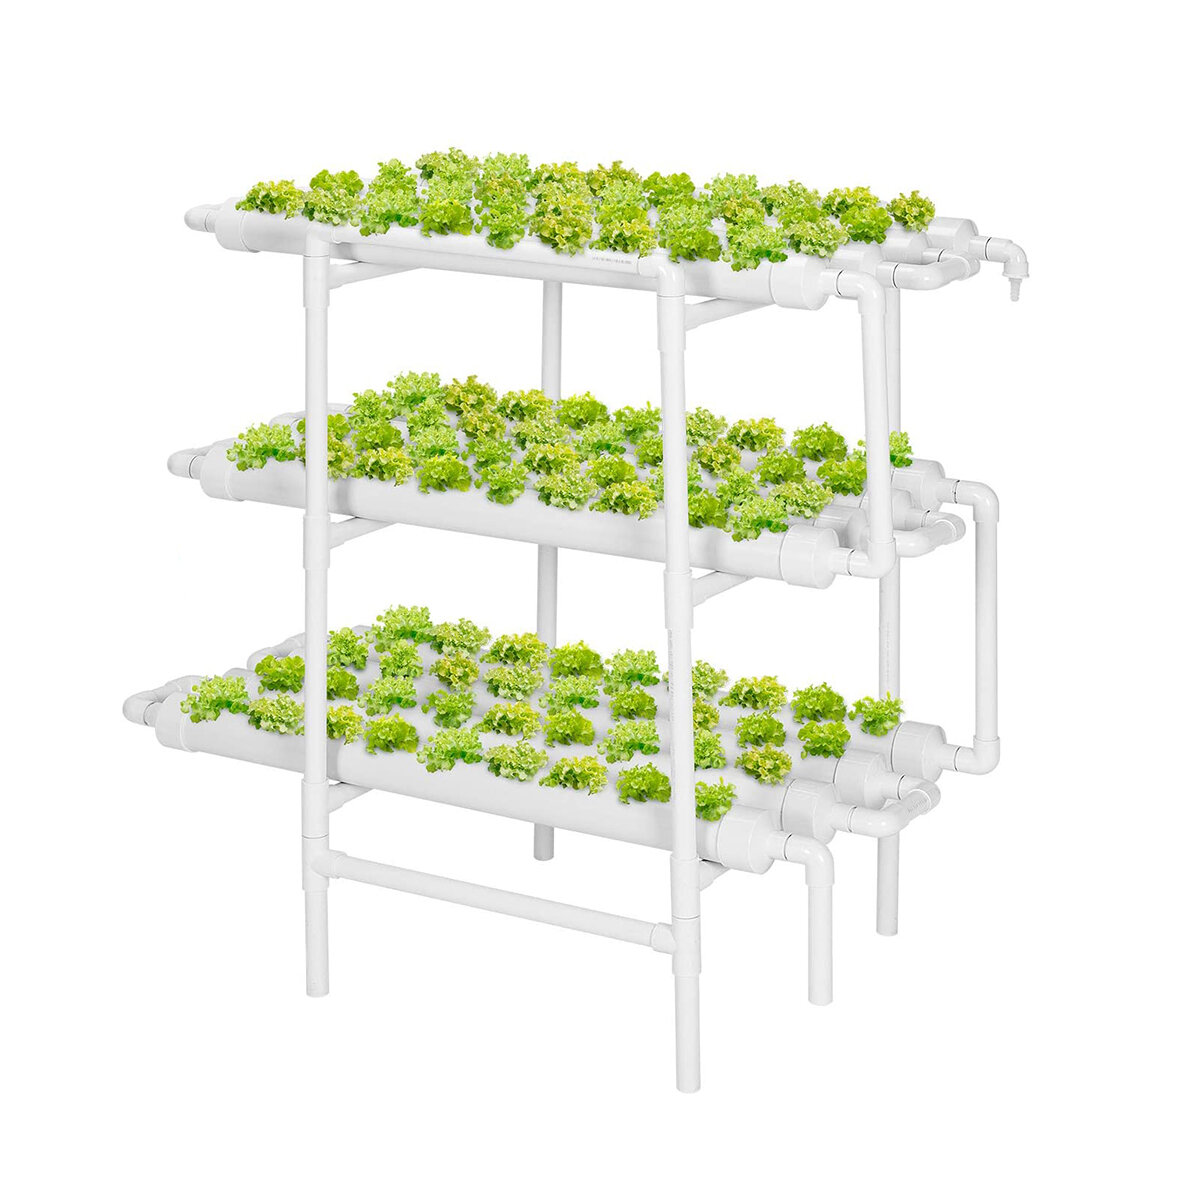 110-220V Hydroponic Grow Kit 108 Plant Sites 12 Pipes 3 Layers Garden Plant Vegetable Planting Water Culture Indoor Farm